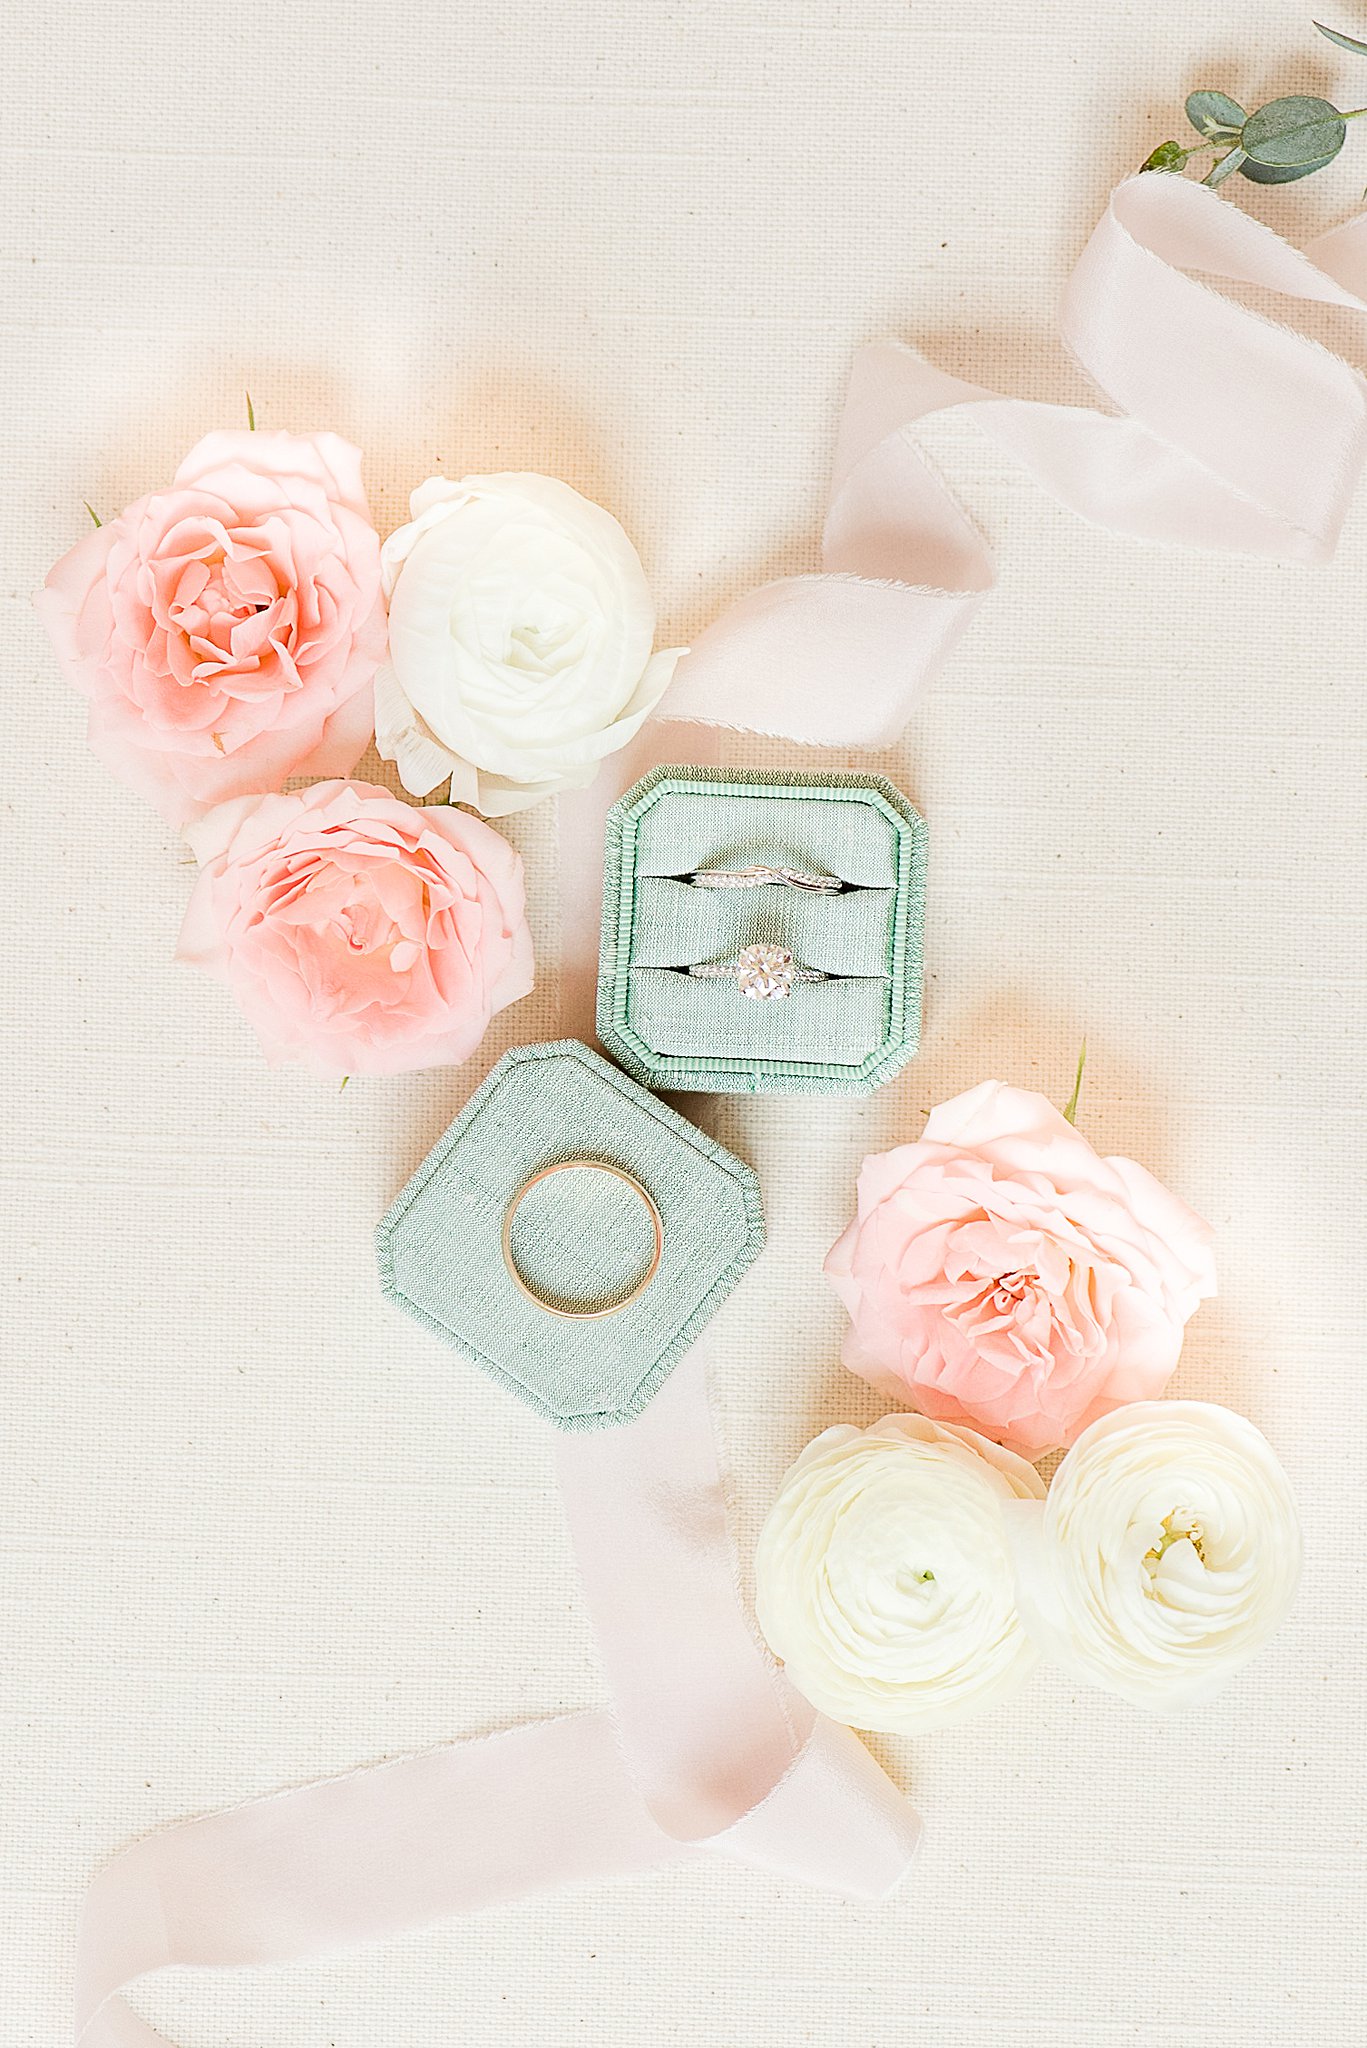 Details of wedding rings sitting in ring bow with pink and white flowers